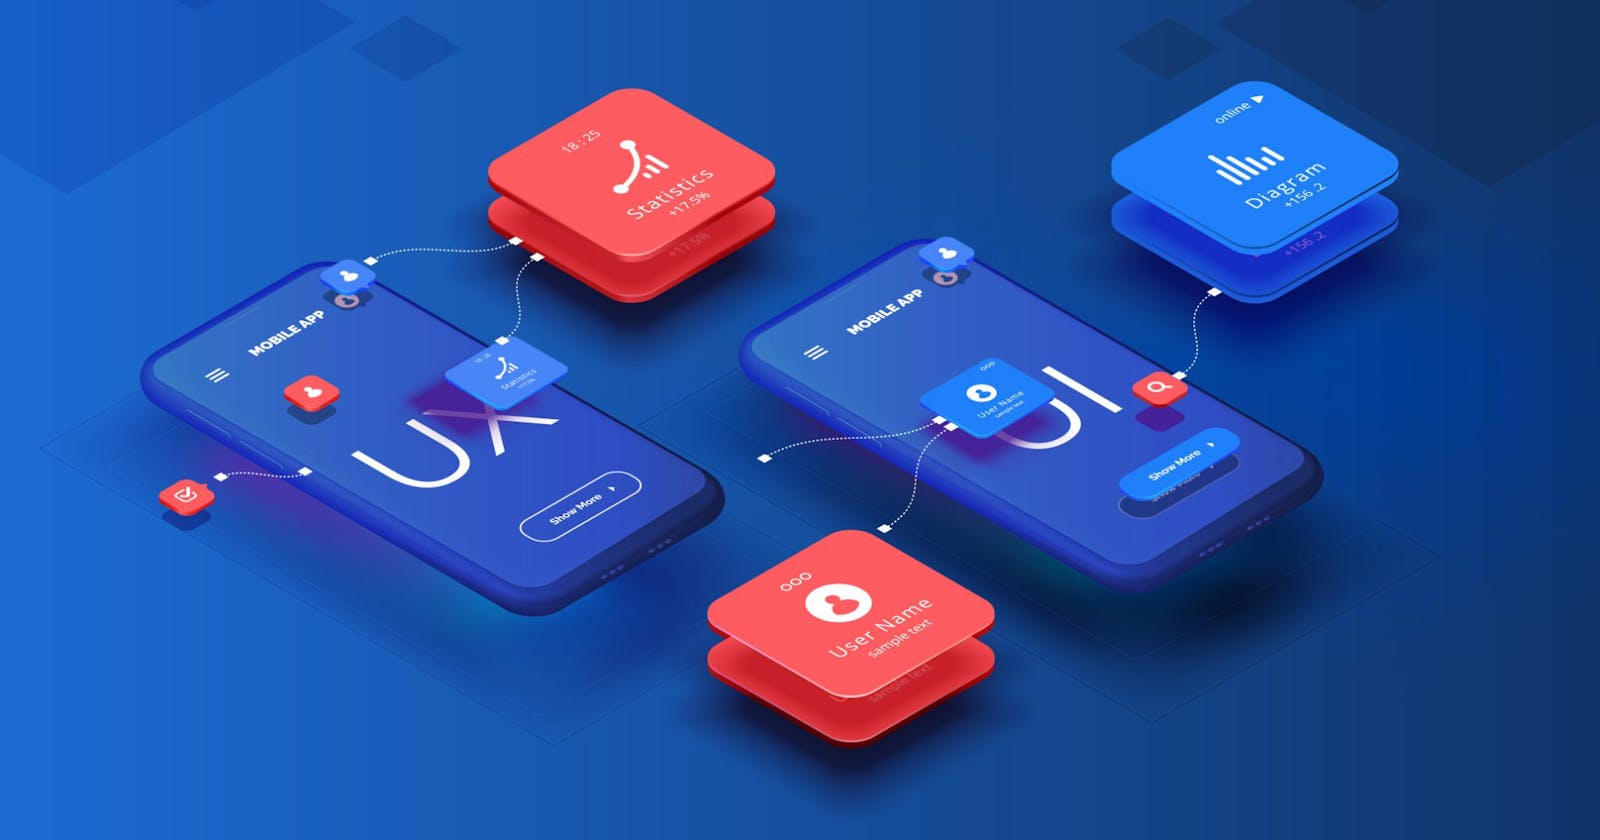 Learn designing with UI/UX